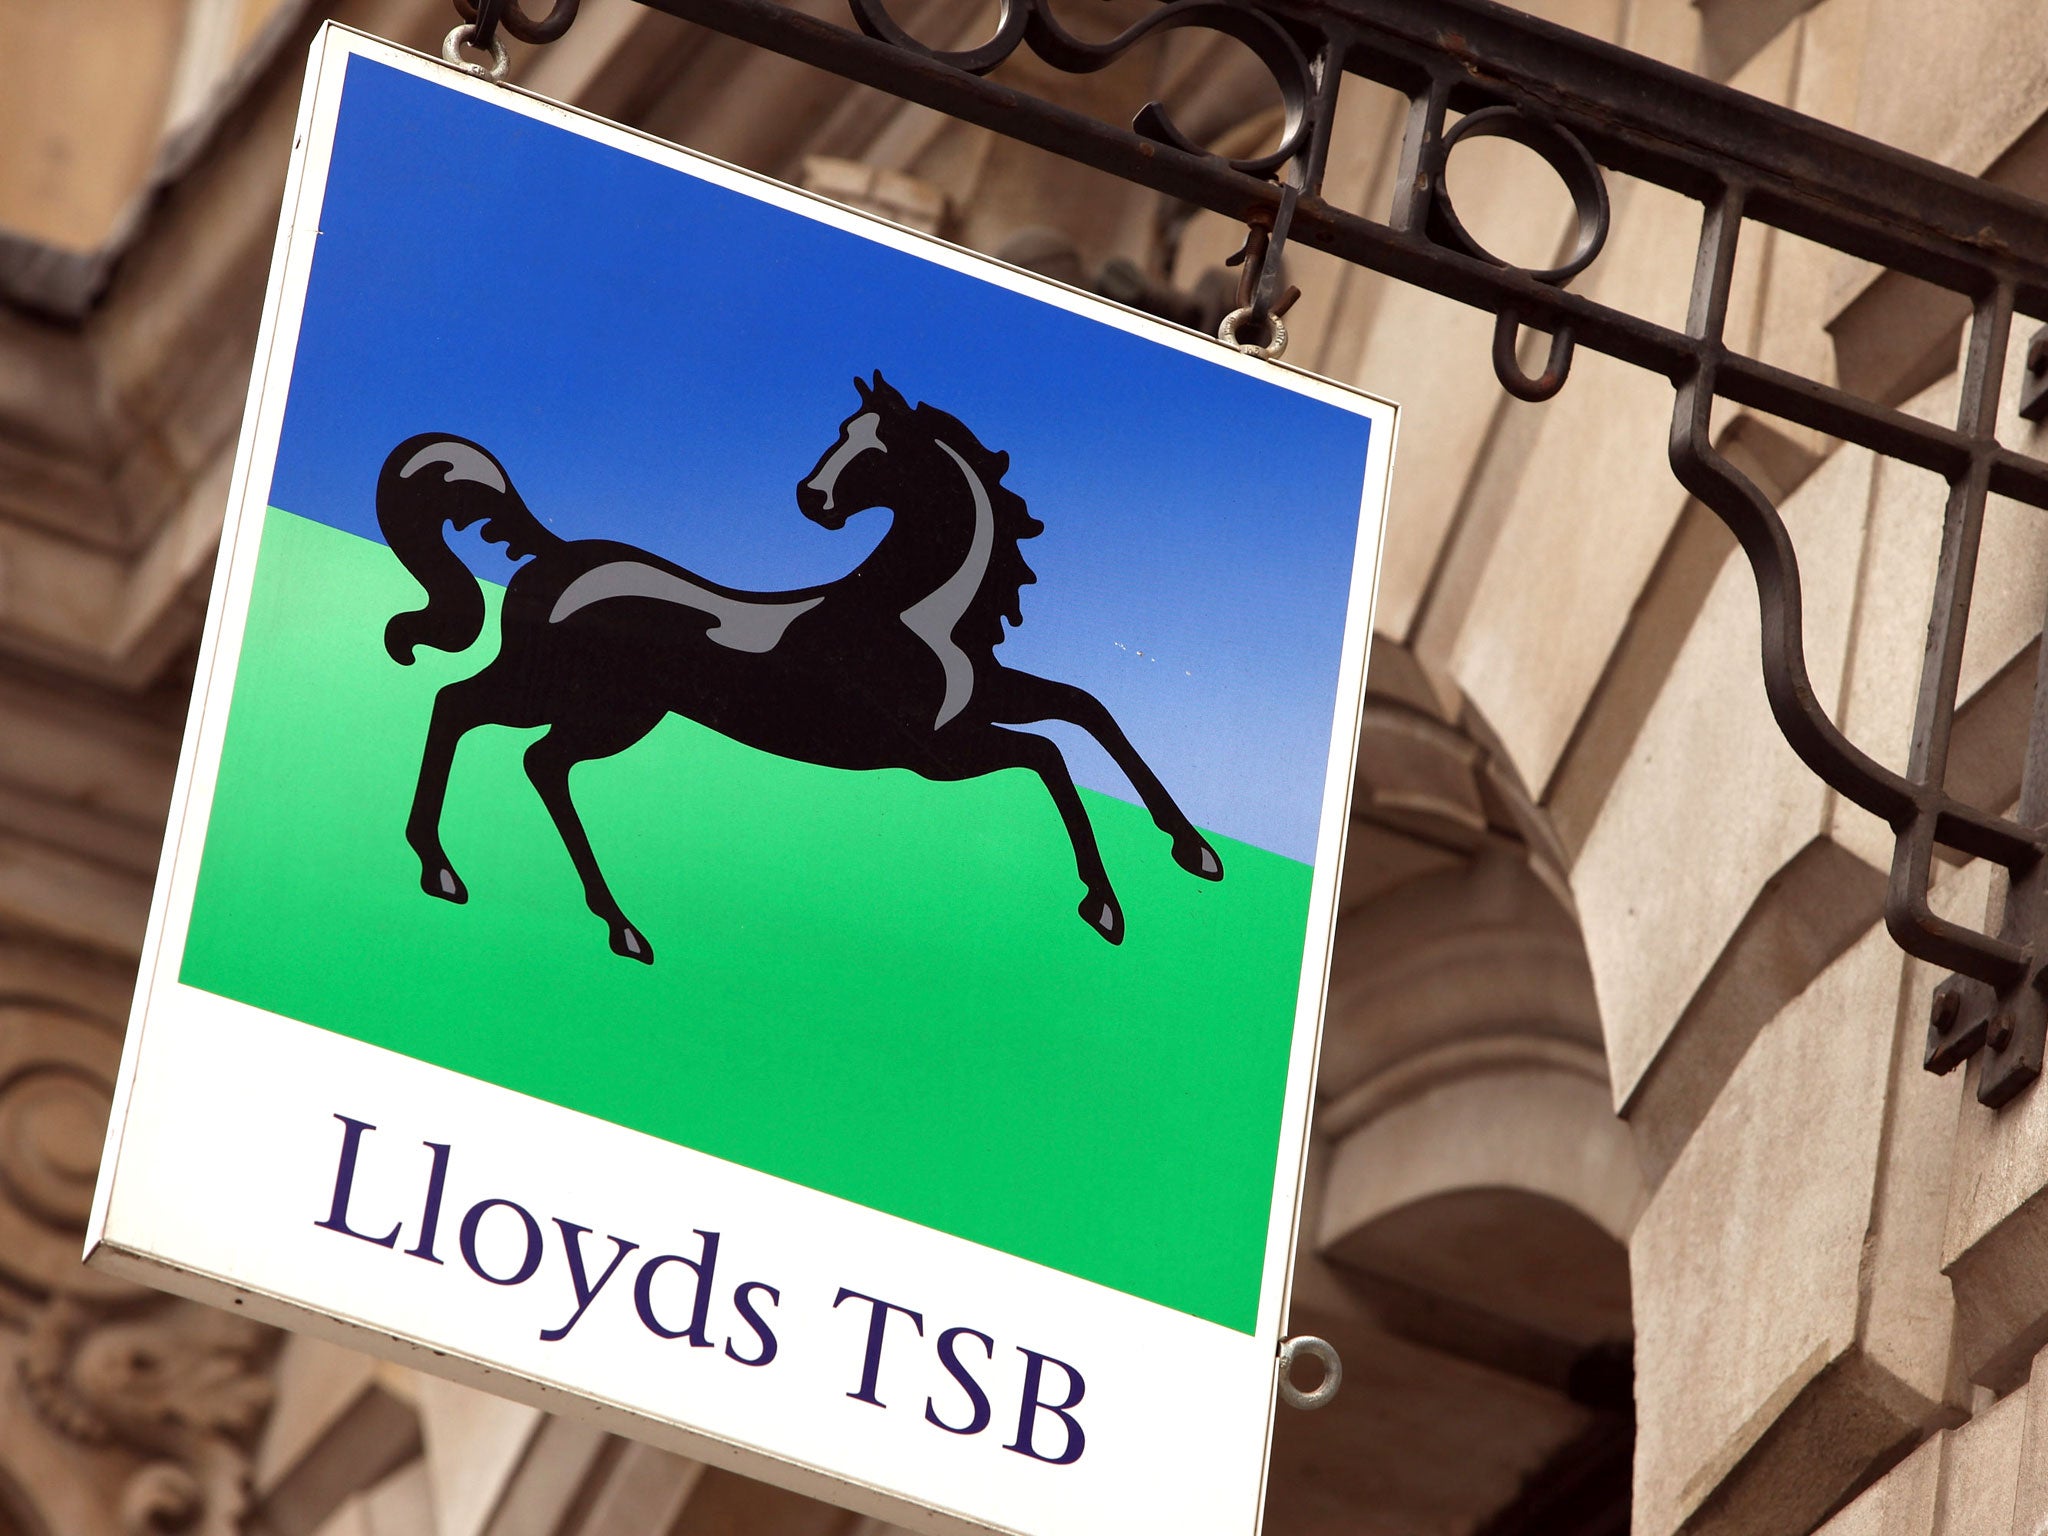 Lloyds chief executive says "fundamentals of the group are strong" however